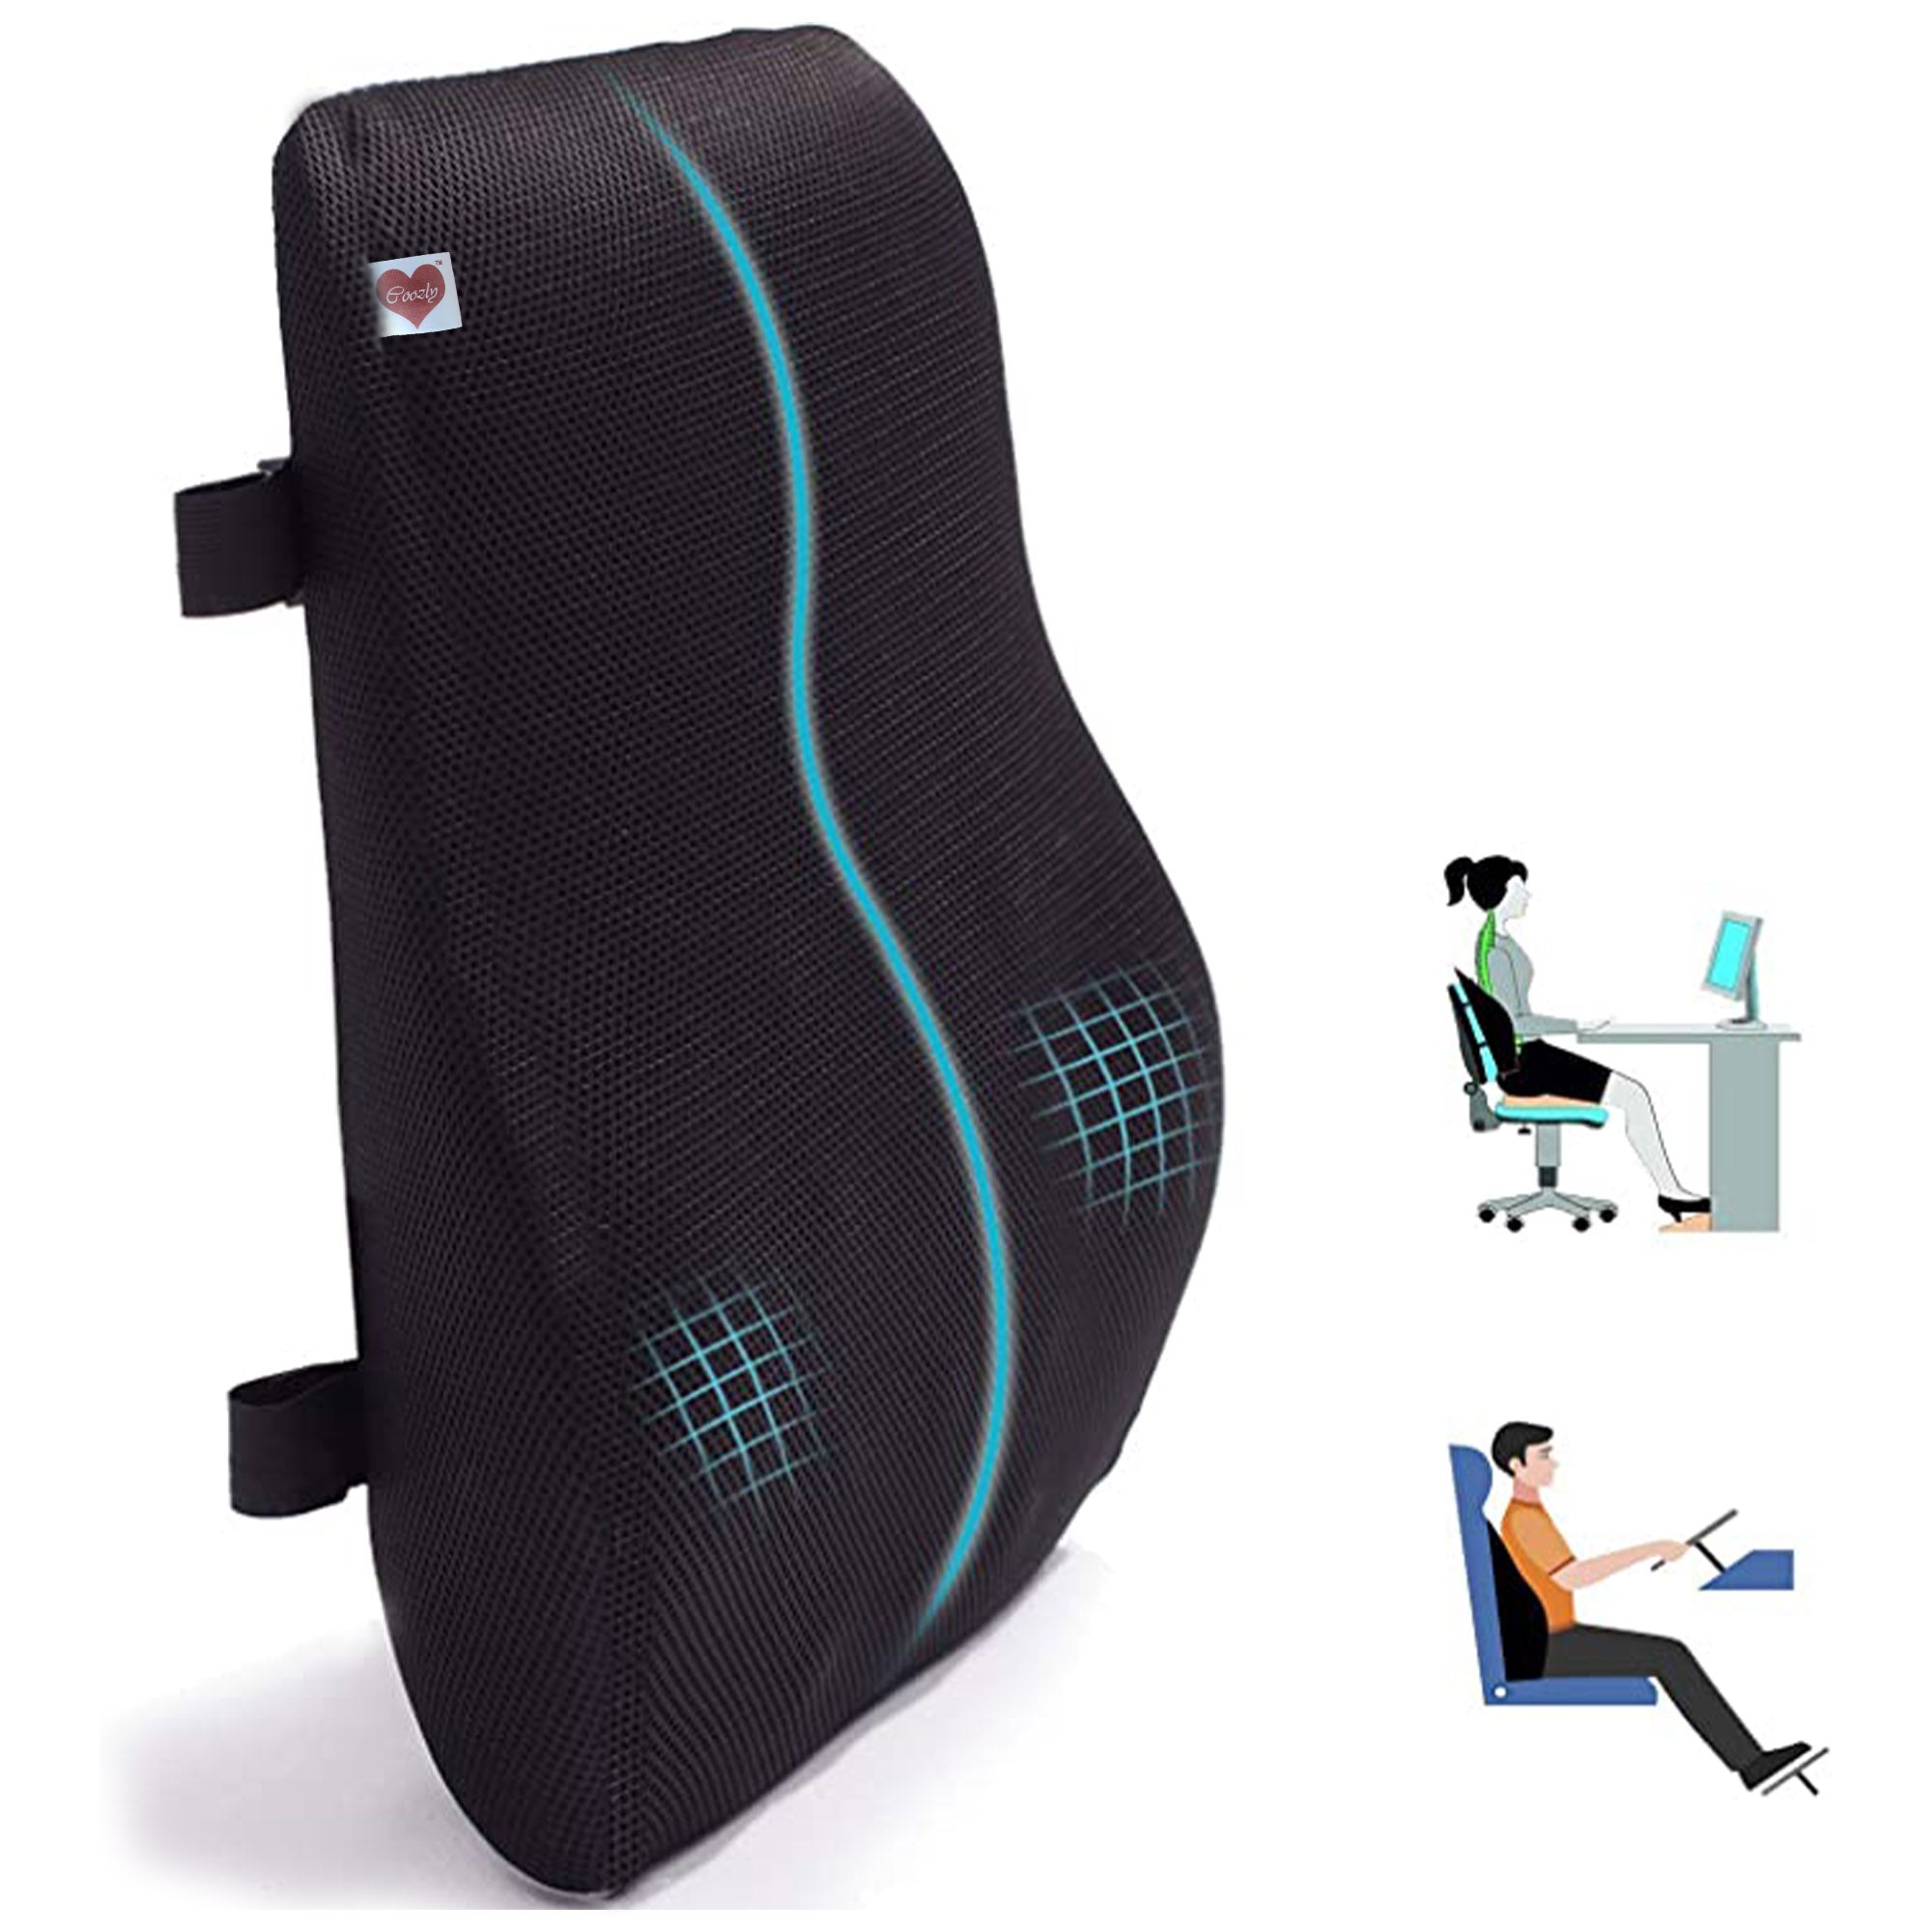 SAMSONITE, cooling gel, lumbar support pillow for office chair or car seat  - boost your lower back comfort zone, high grade - memory foam, universal